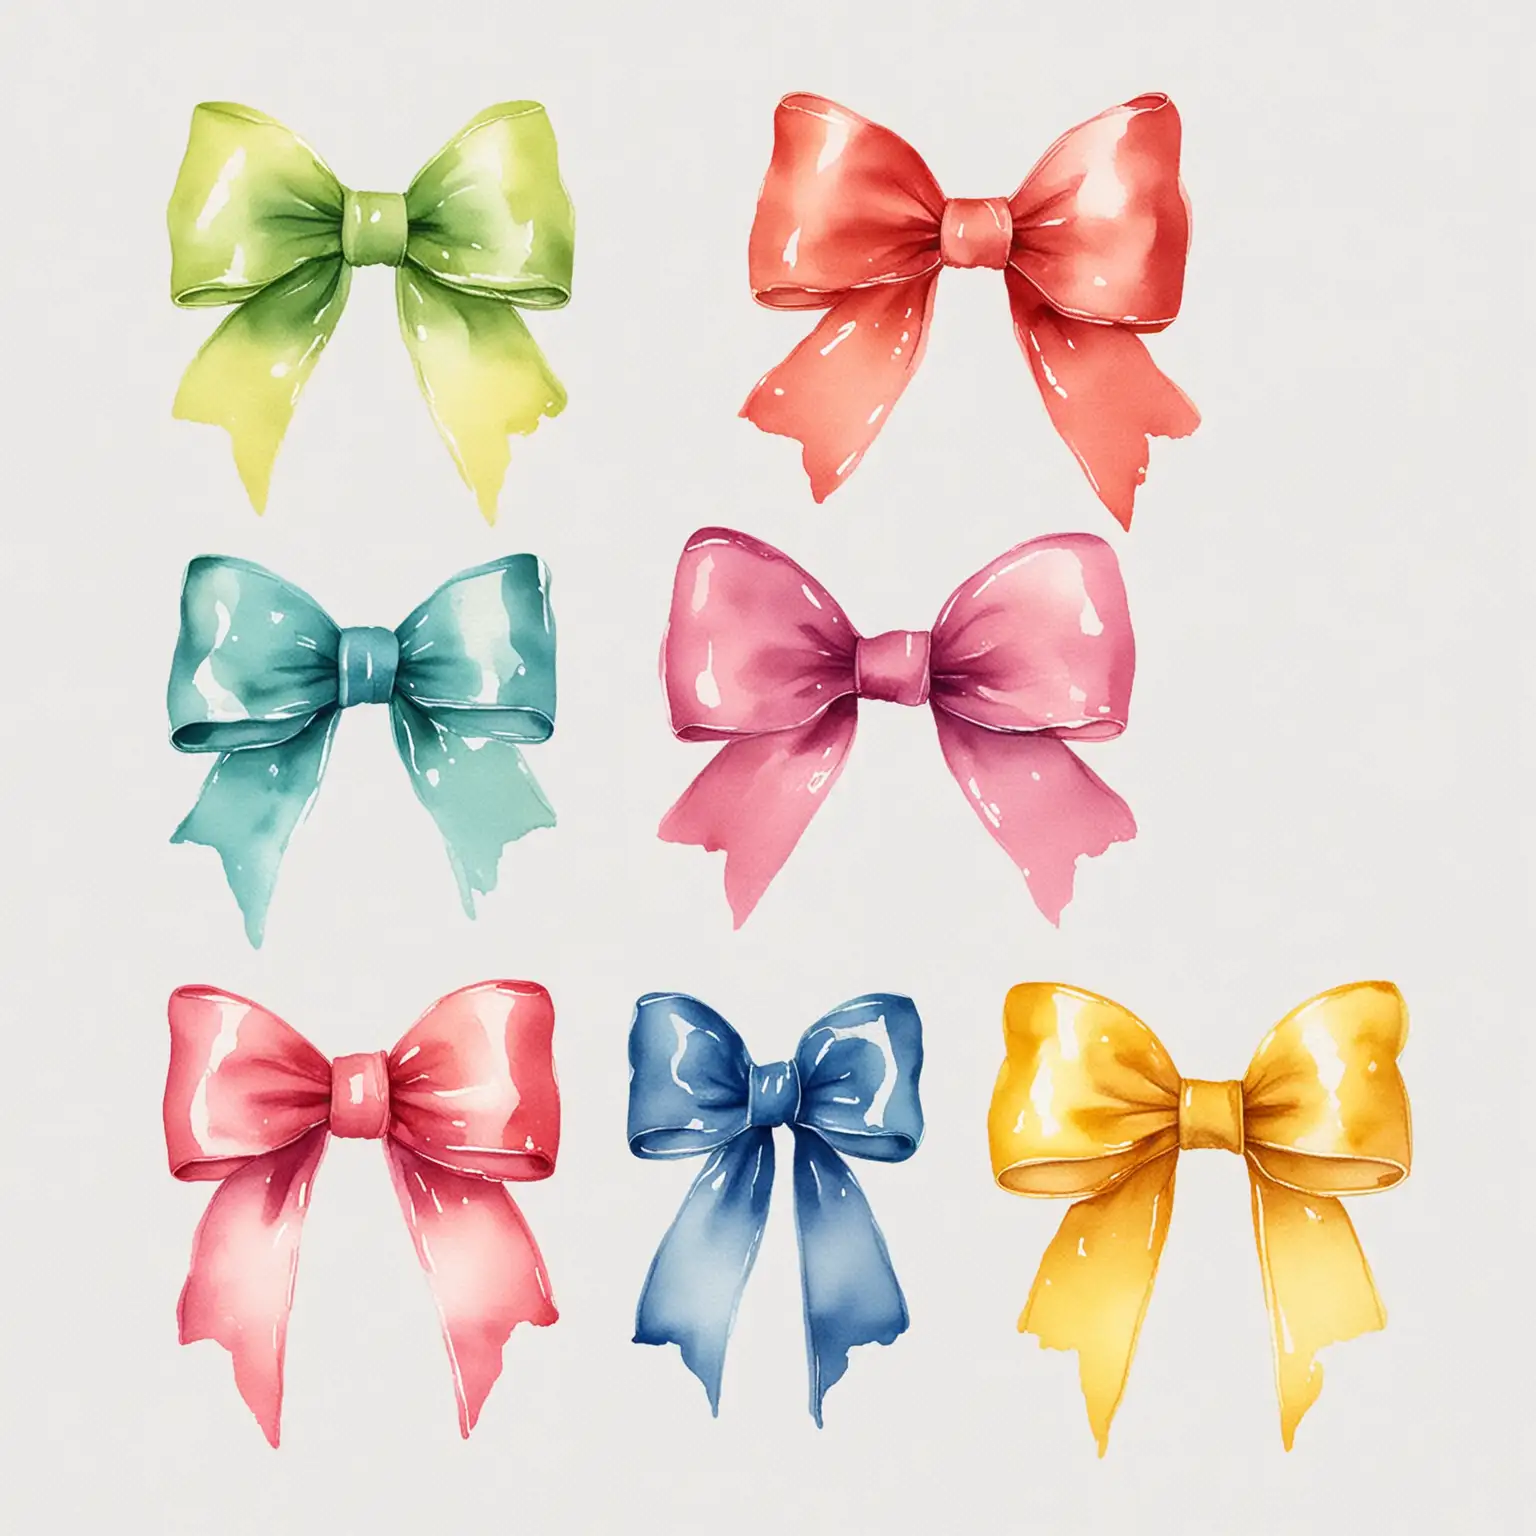 Colorful Watercolor Bow Clip Art Set on White Background